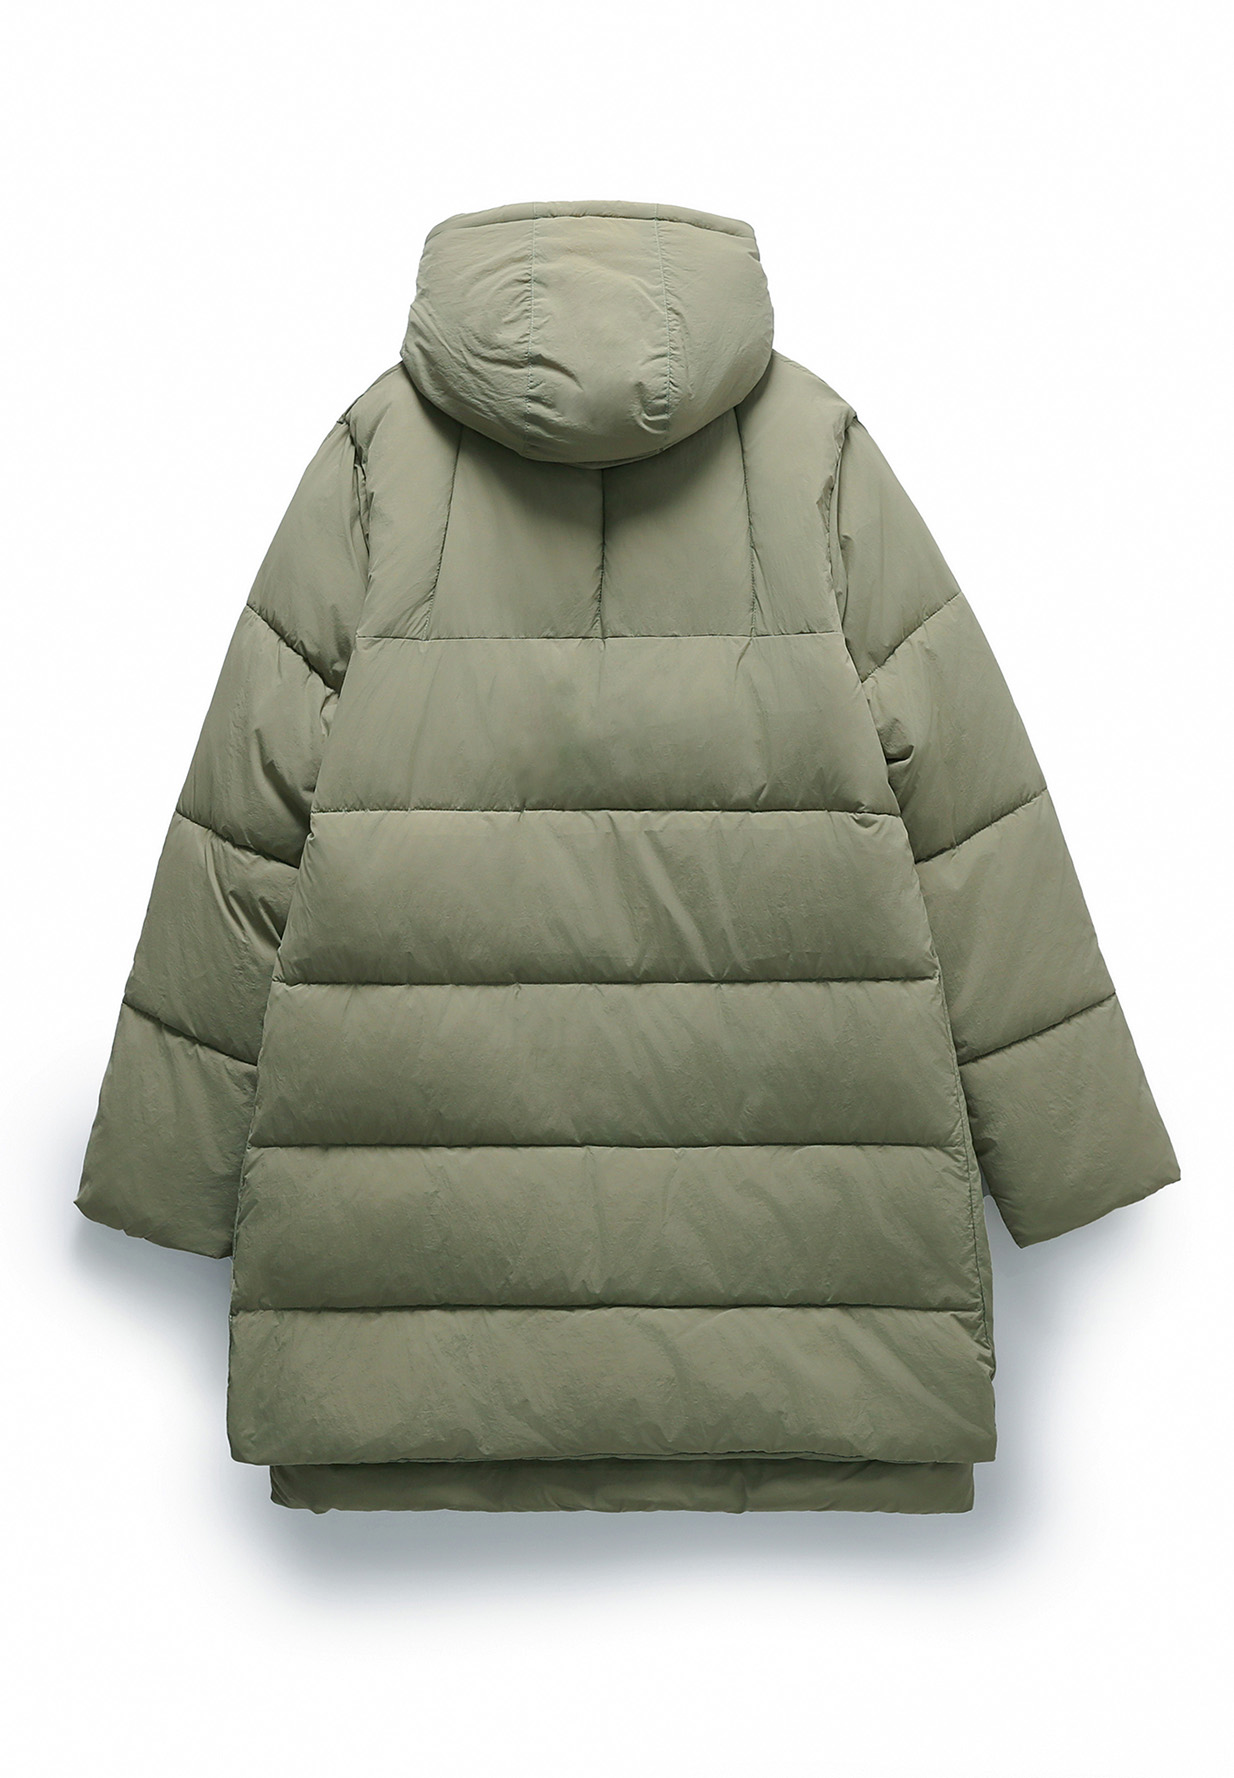 EMBASSY OF BRICKS AND LOGS Fargo Puffer Jacket pale olive M